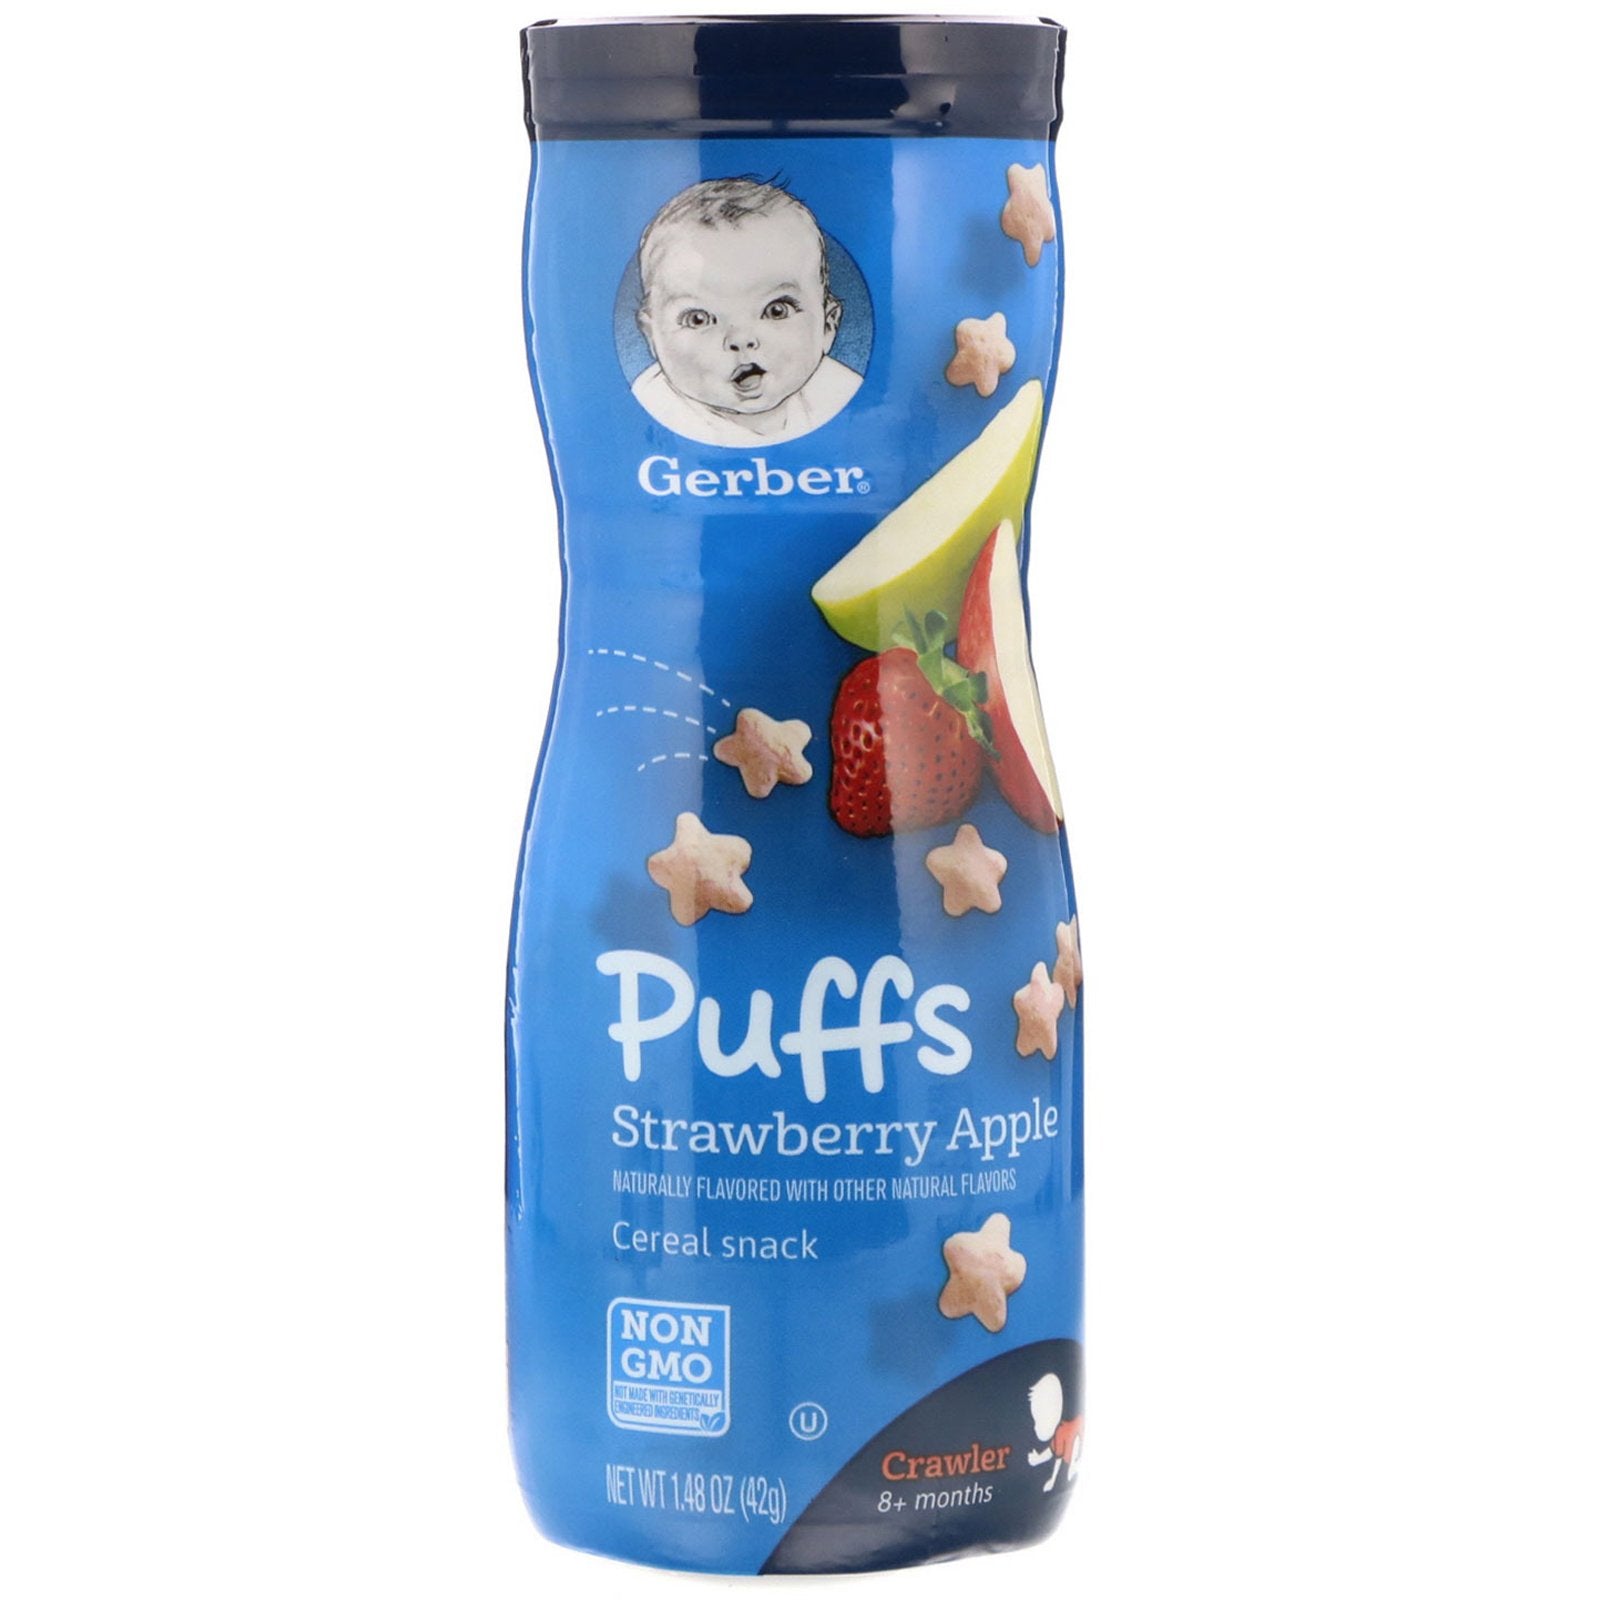 Gerber, Puffs Cereal Snack, 8+ Months, Strawberry Apple, 1.48 oz (42 g)